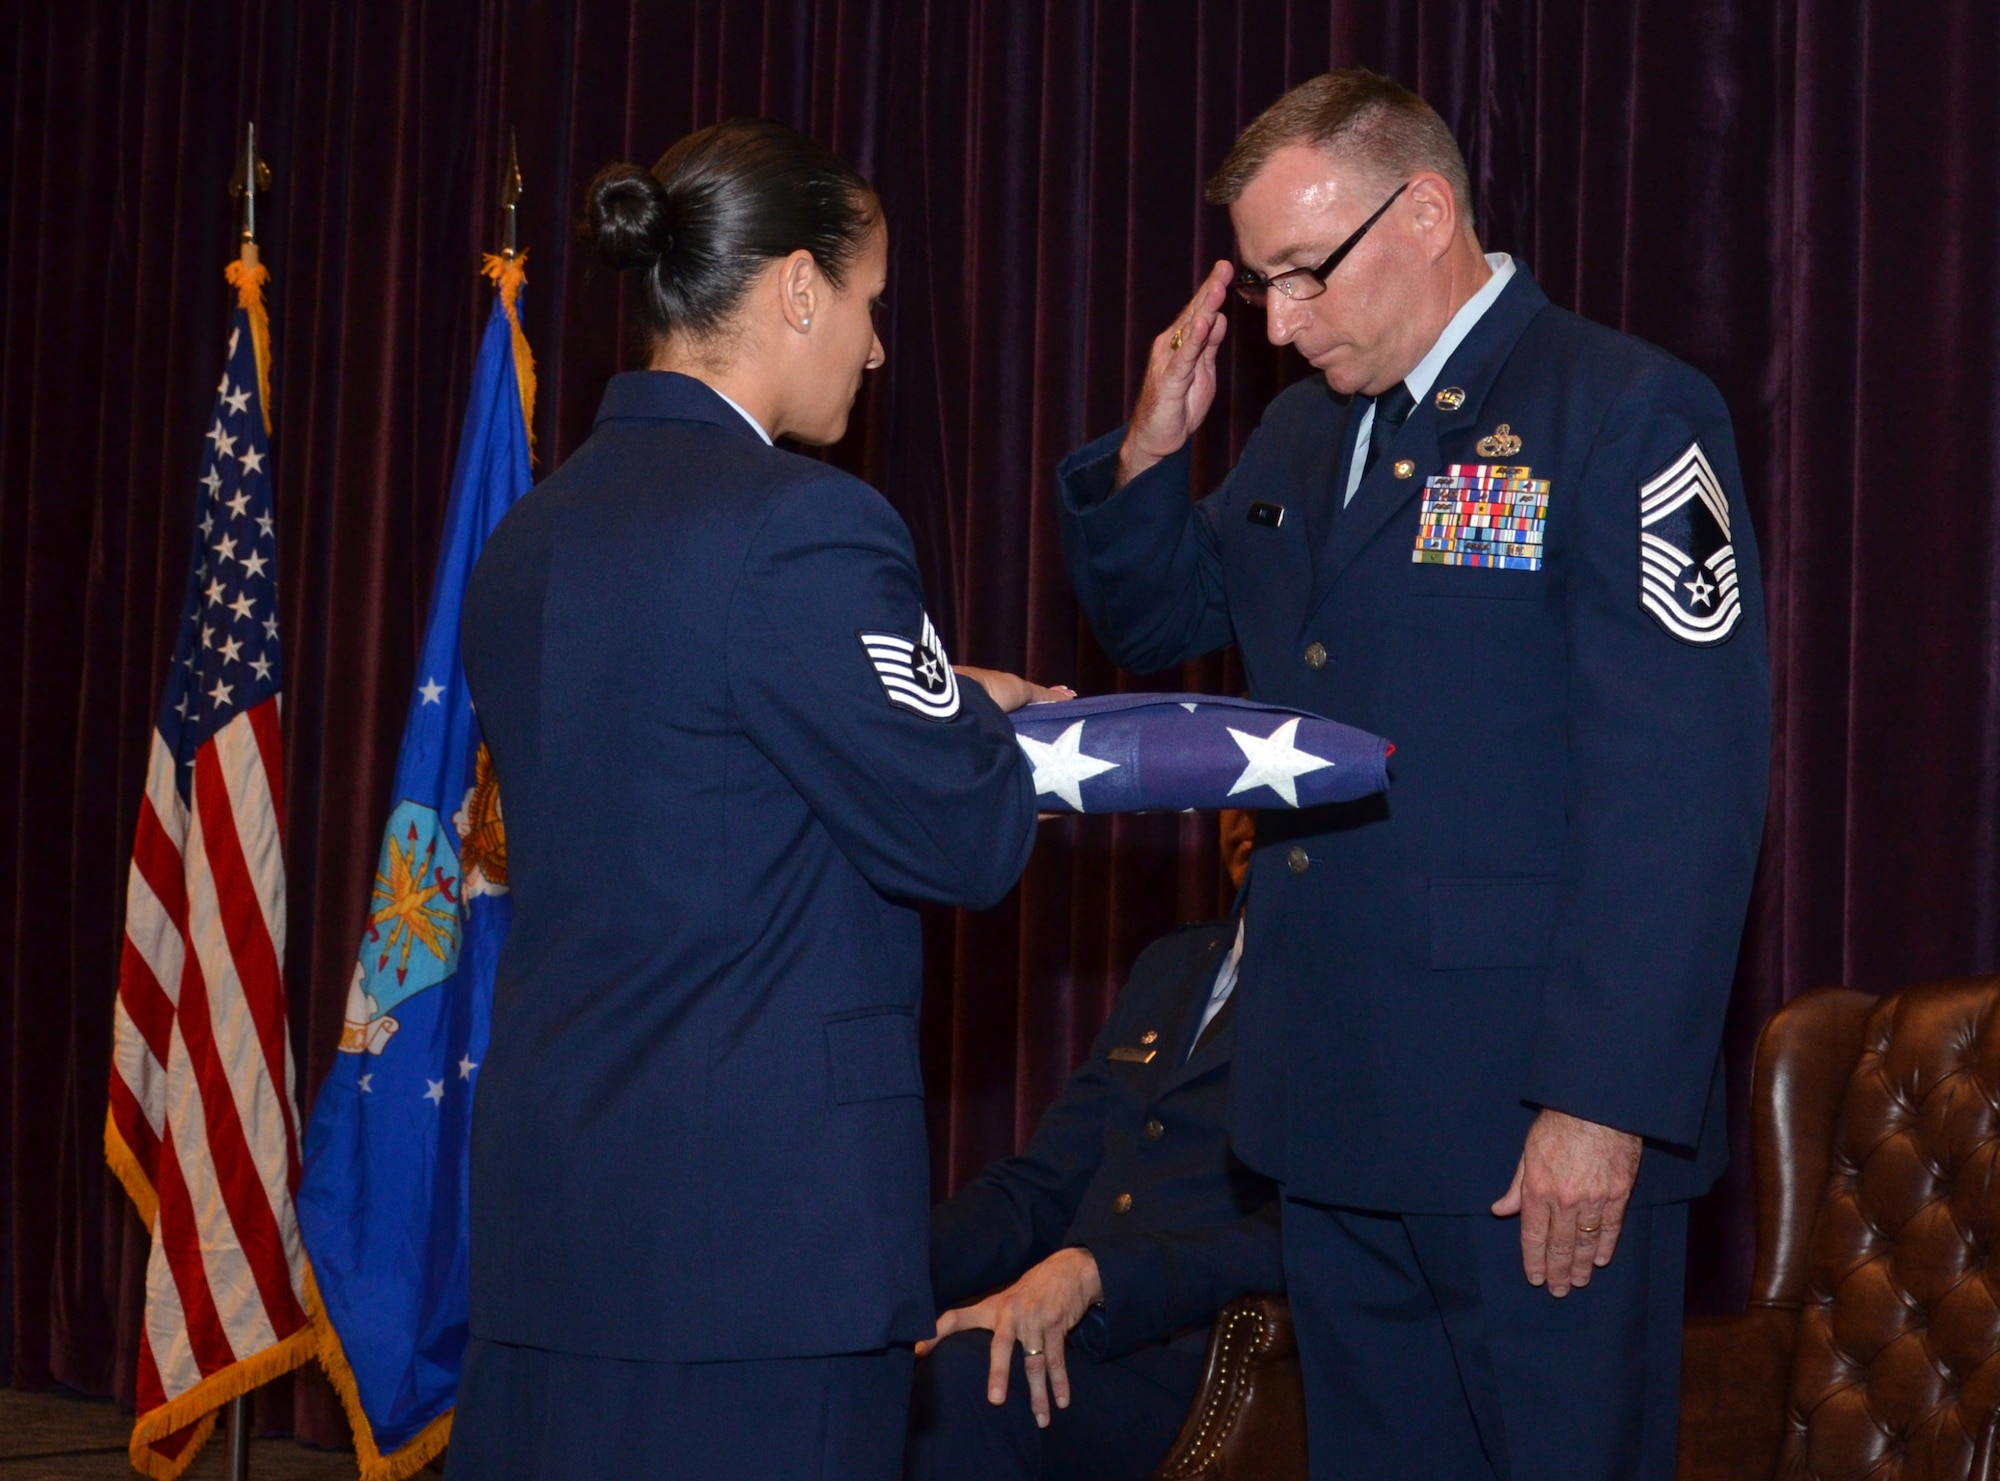 Chief Master Sgt. Phil Roe salutes the American flag during his retirement ceremony Sept. 10, 2016 at Patrick Air Force Base, Fla. Roe served in the 920th Rescue Wing and its predecessor squadron for 26 of his 36 years in the Air Force. (U.S. Air Force photo by 1st Lt. Anna-Marie Wyant)